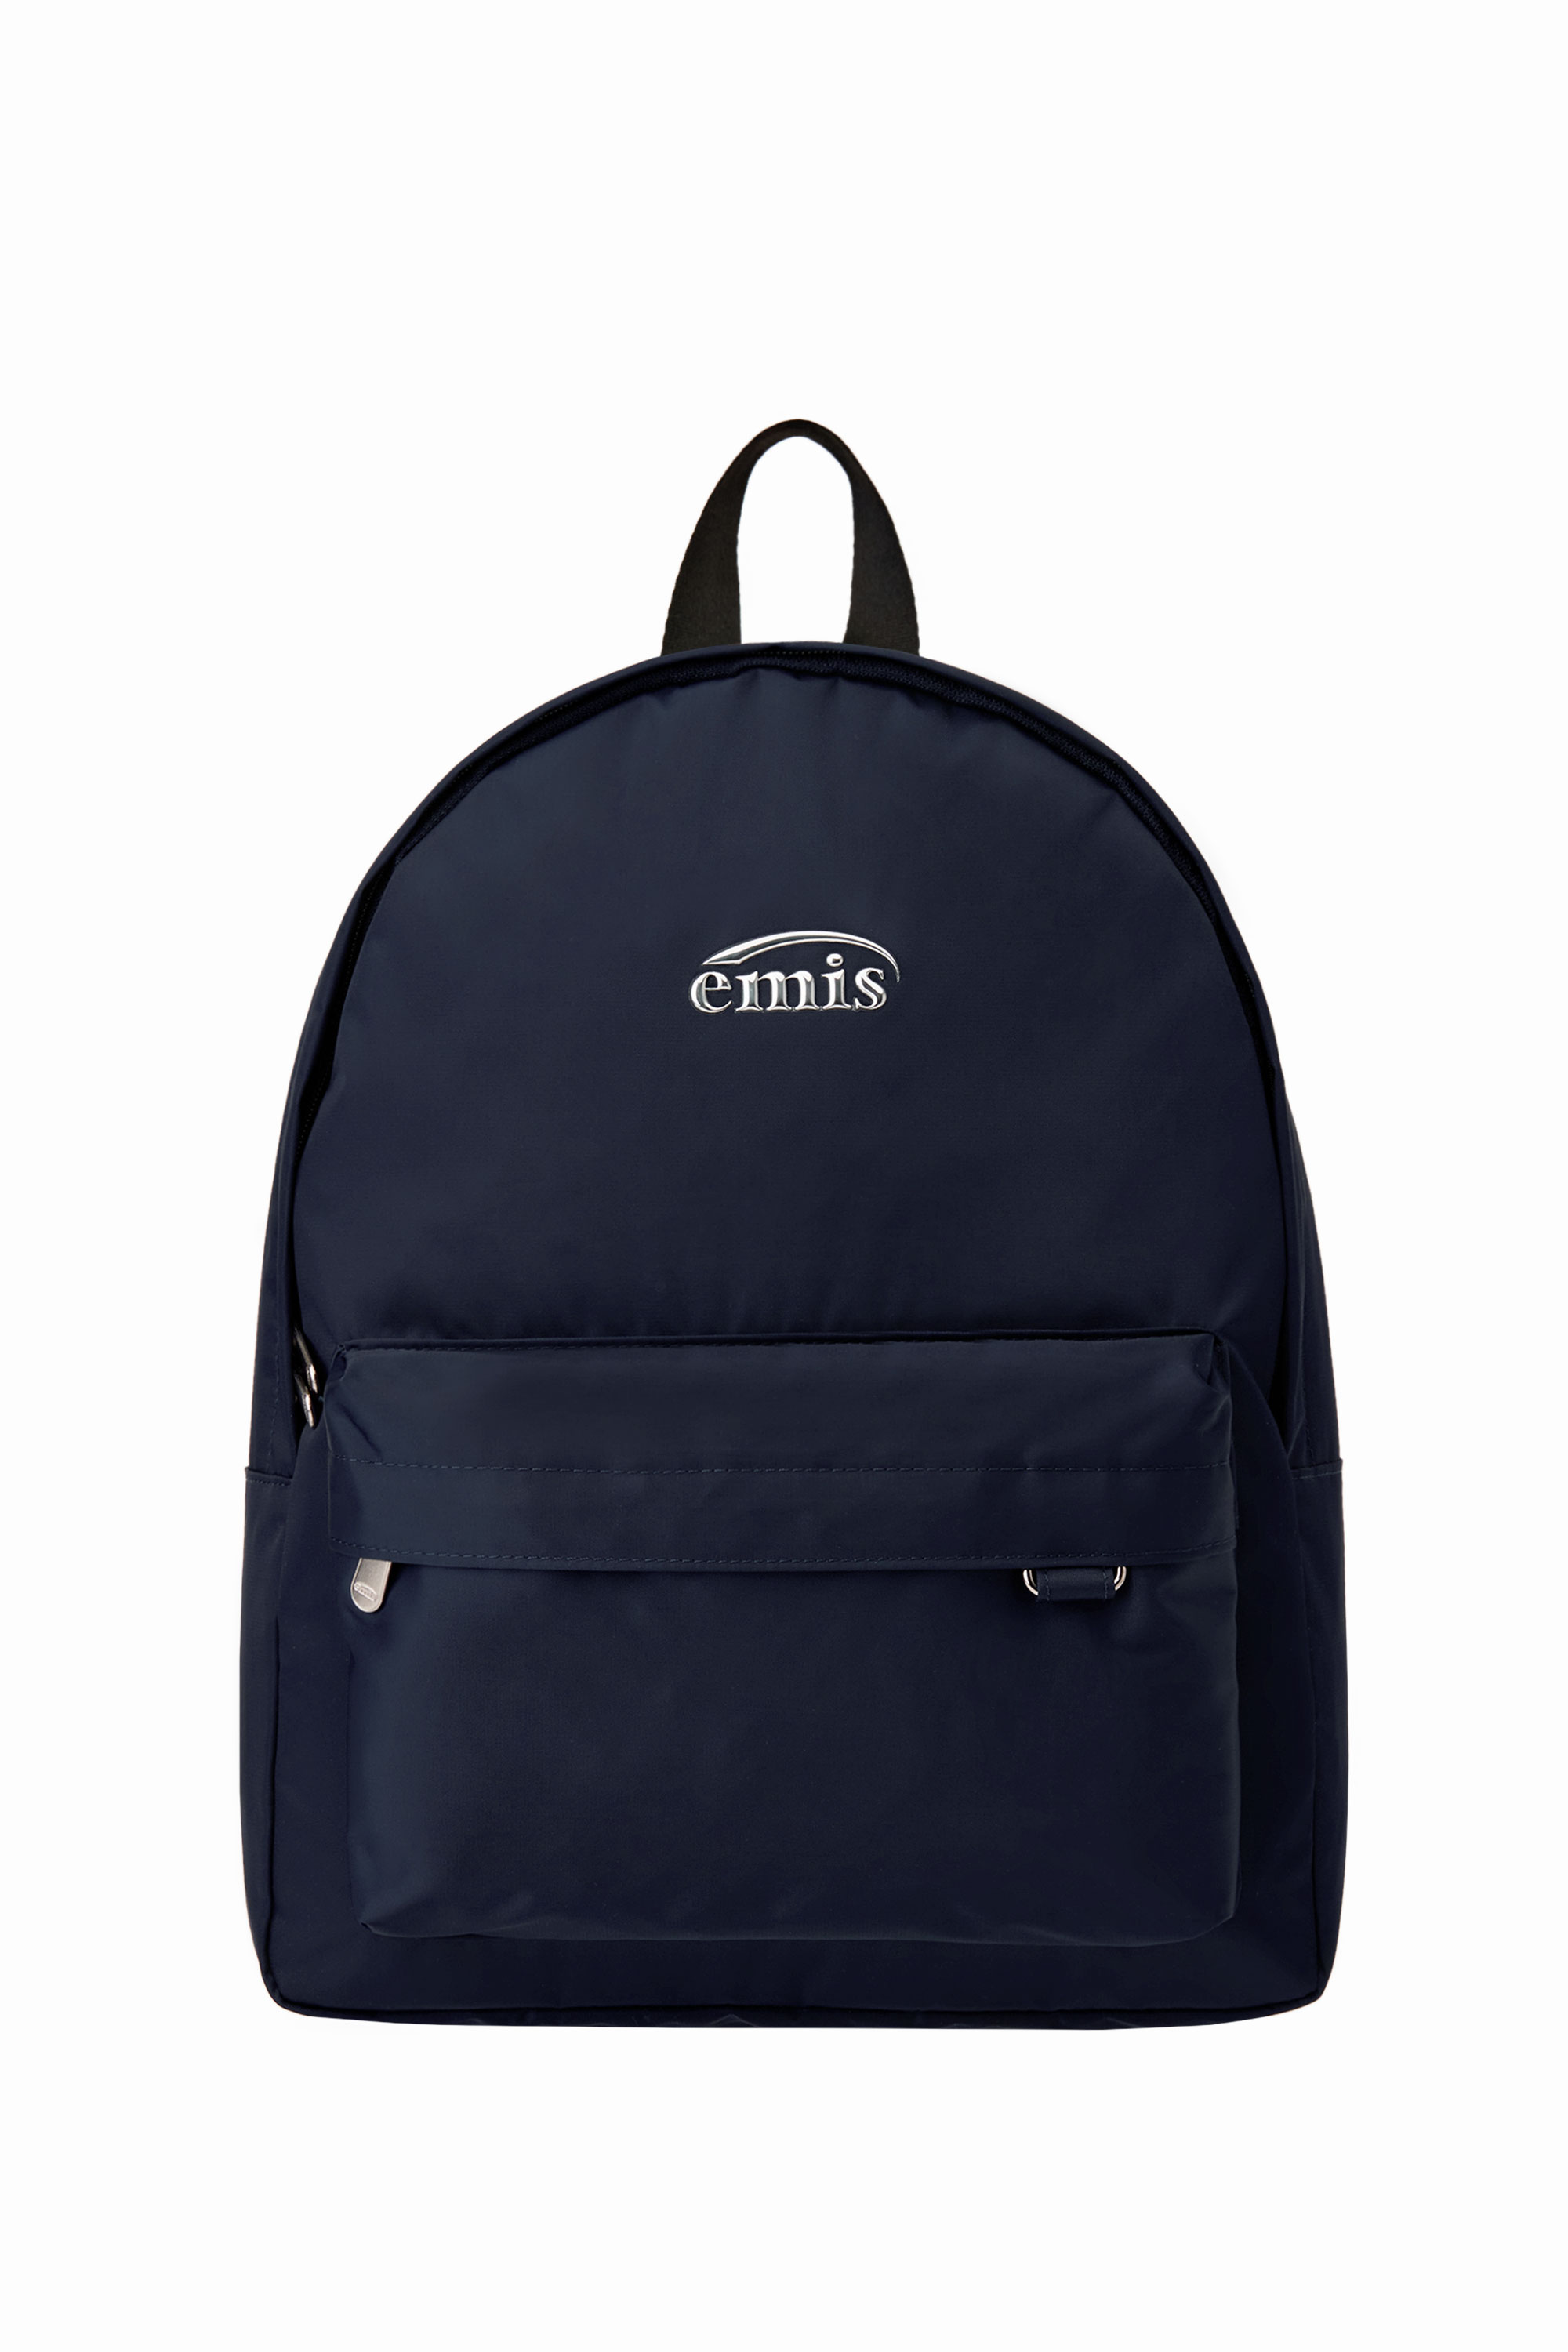 EVERYDAY BACKPACK-NAVY